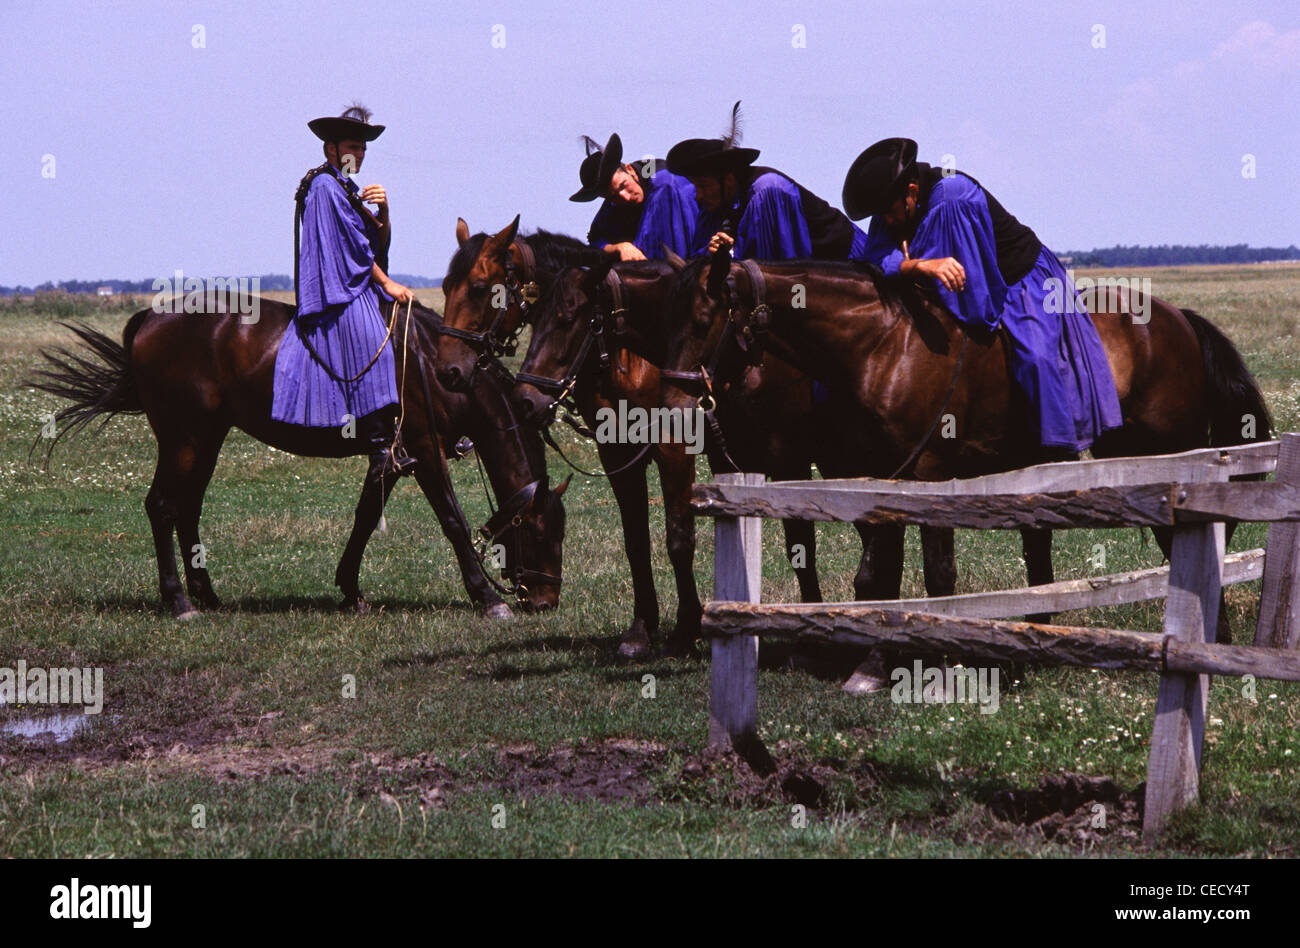 Csikos mounted horse-herdsmen in traditional attire siting on Nonius Hungarian horse breed in the vast Hungarian Plain called the Puszta of Hortobagy National Park near Debrecen Eastern Hungary Stock Photo